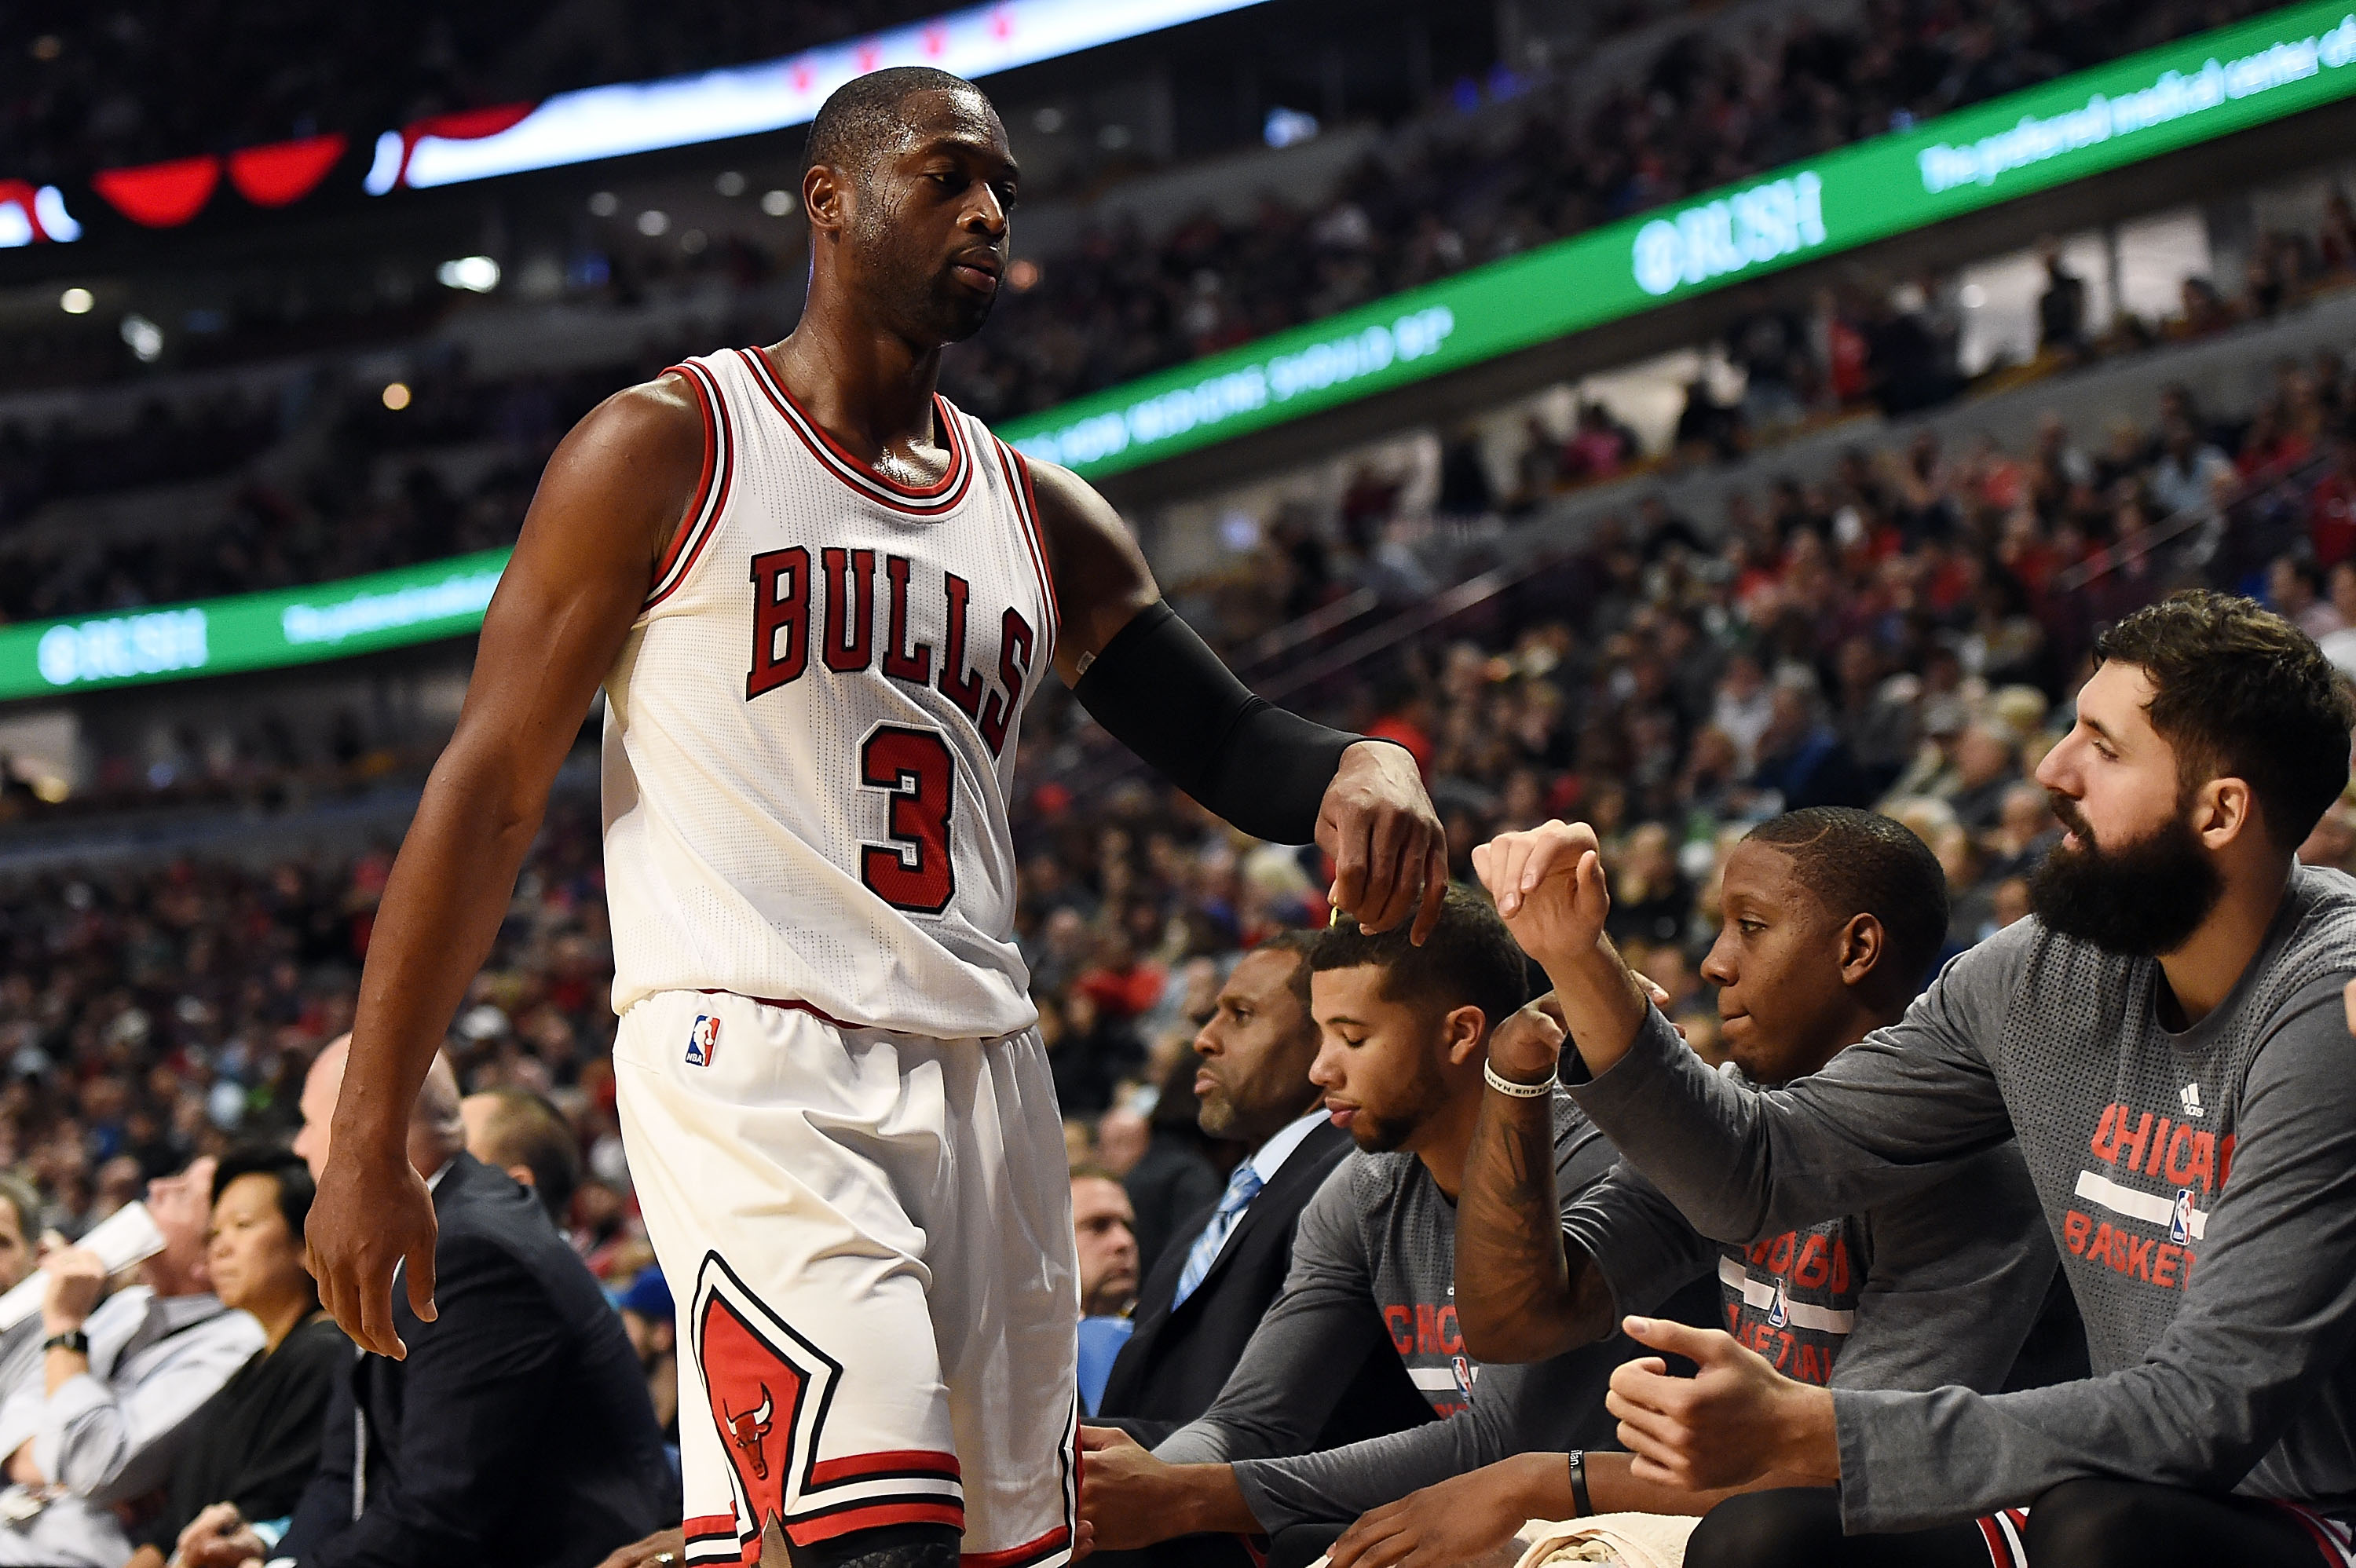 CHICAGO, IL - OCTOBER 27: Dwyane Wade #3 of the Chicago Bulls walks to the bench during the second half of a game against the Boston Celtics at the United Center on October 27, 2016 in Chicago, Illinois. NOTE TO USER: User expressly acknowledges and agrees that, by downloading and or using this photograph, User is consenting to the terms and conditions of the Getty Images License Agreement.   Stacy Revere/Getty Images/AFP